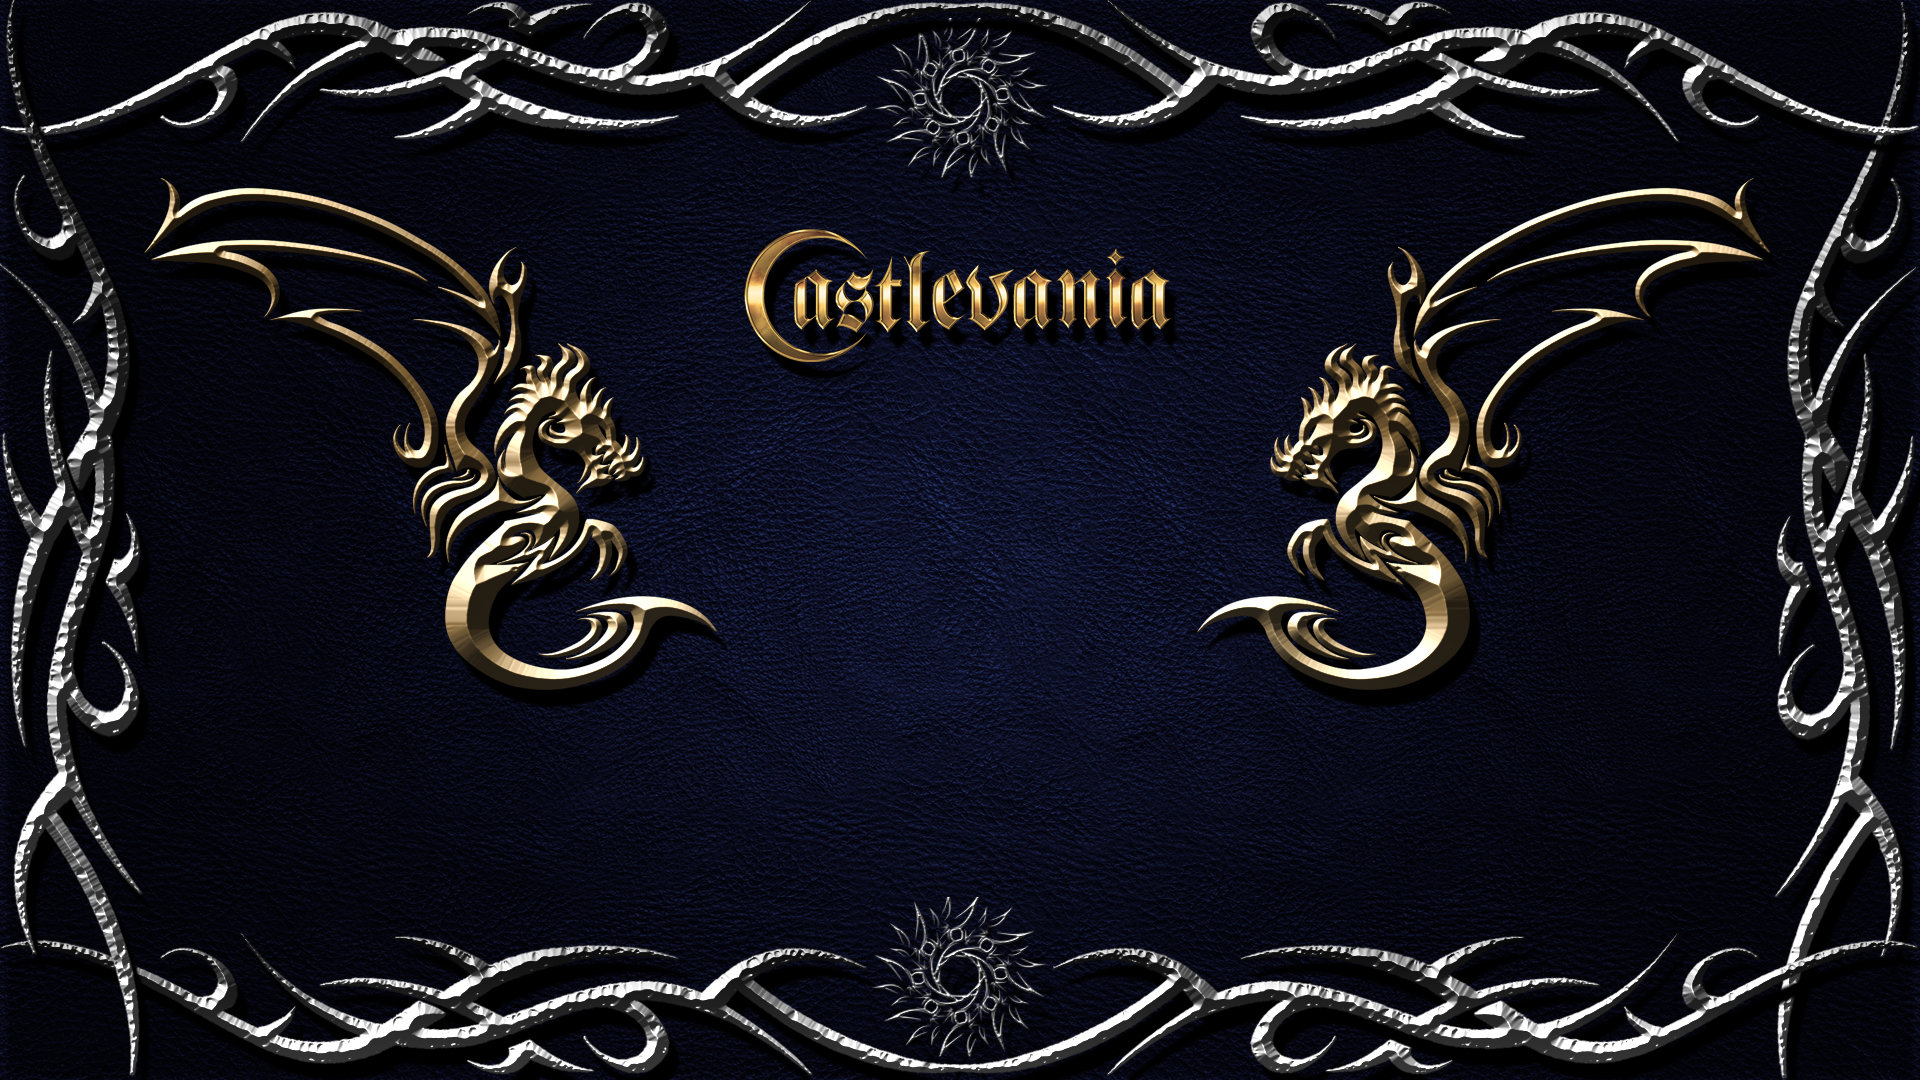 Download hd 1080p Castlevania PC wallpaper ID:391312 for free